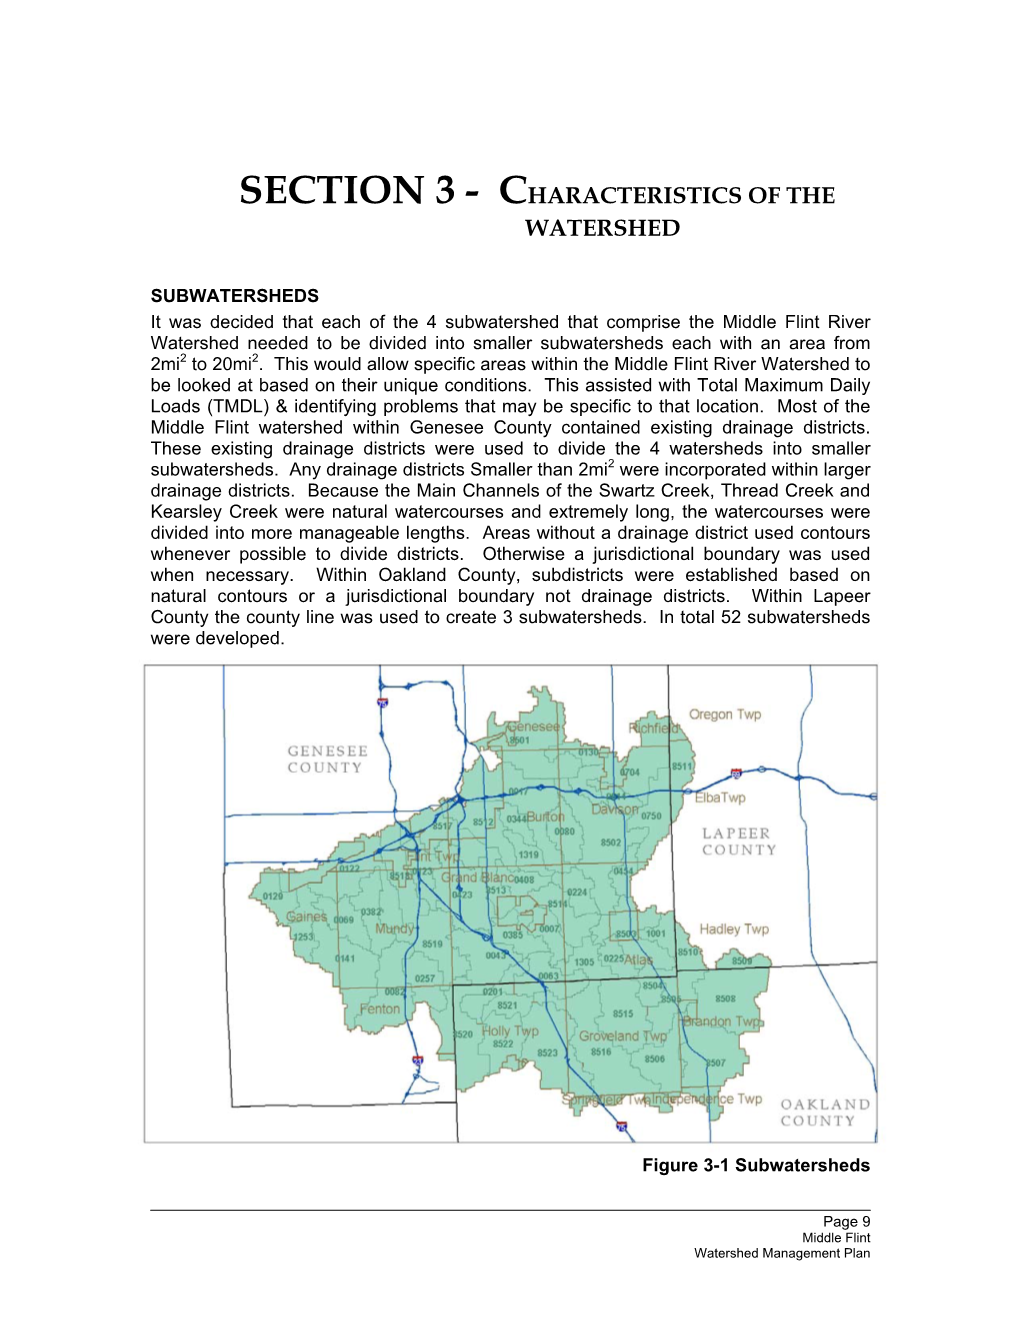 Section 3 - Characteristics of the Watershed